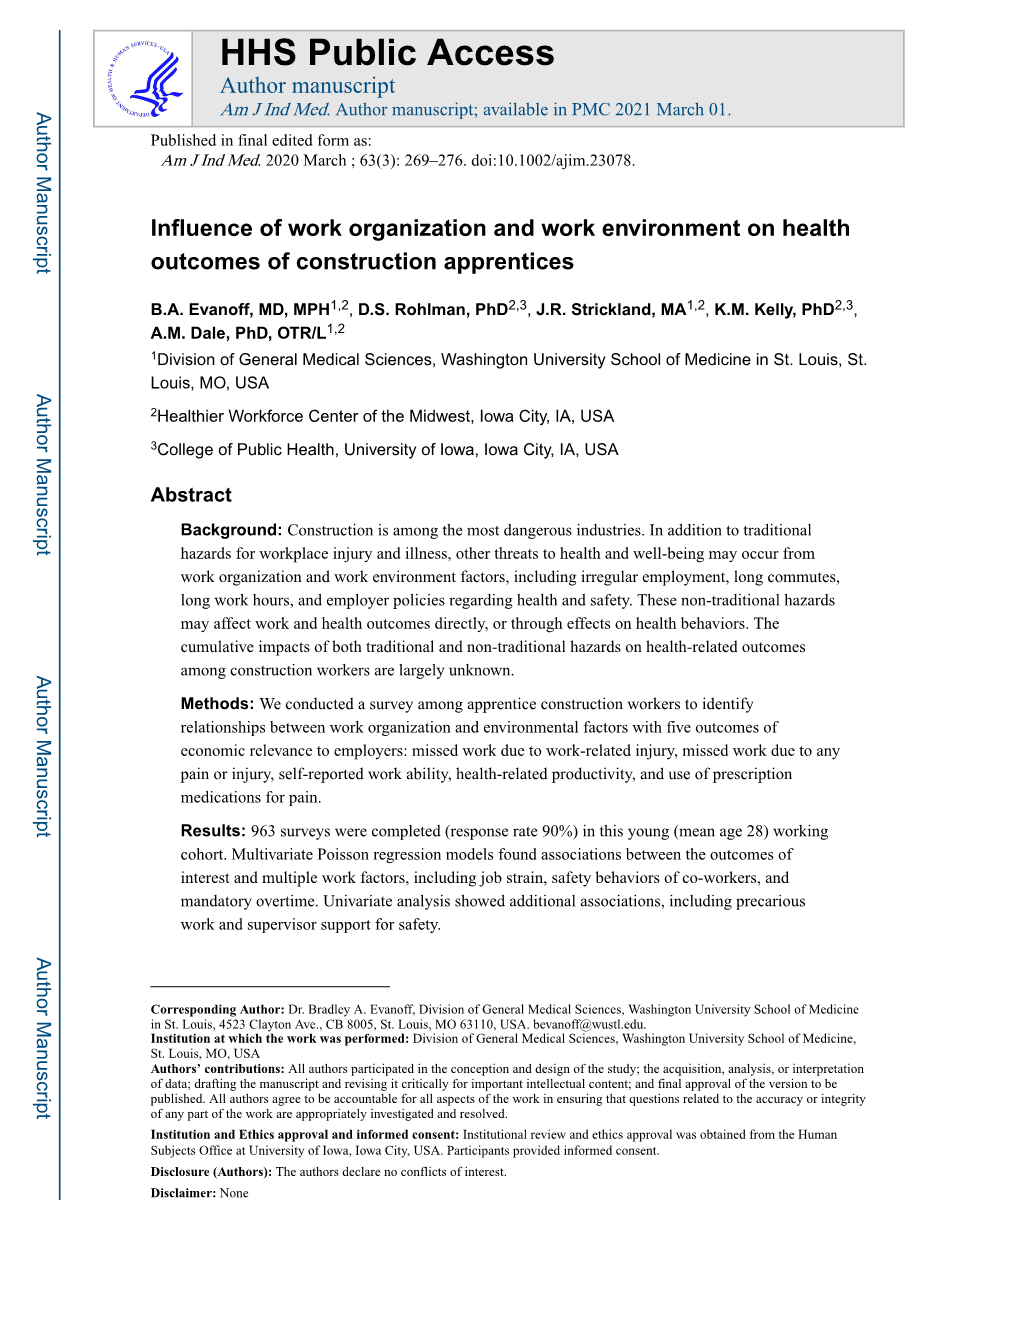 Influence of Work Organization and Work Environment on Health Outcomes of Construction Apprentices